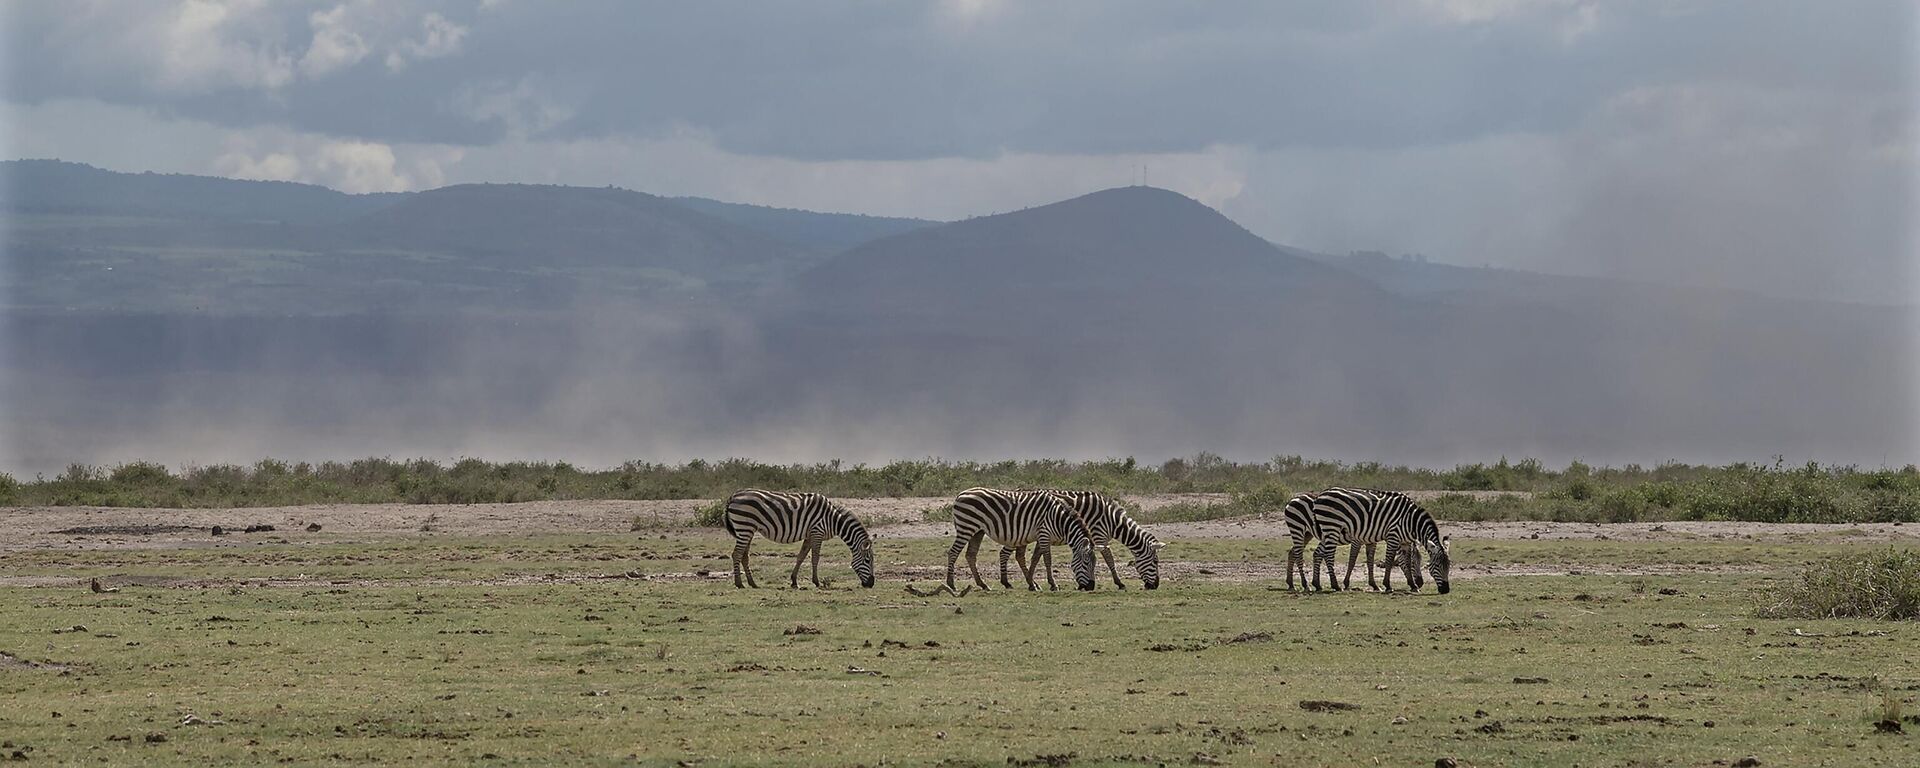 A small herd of common Zebra graze on the savannah on November 30, 2022 as dust kicks up in the background at the Amboseli National Park, the vast area hard hit by the drought that wiped out pastures for the main herbivores. - Sputnik International, 1920, 26.02.2023